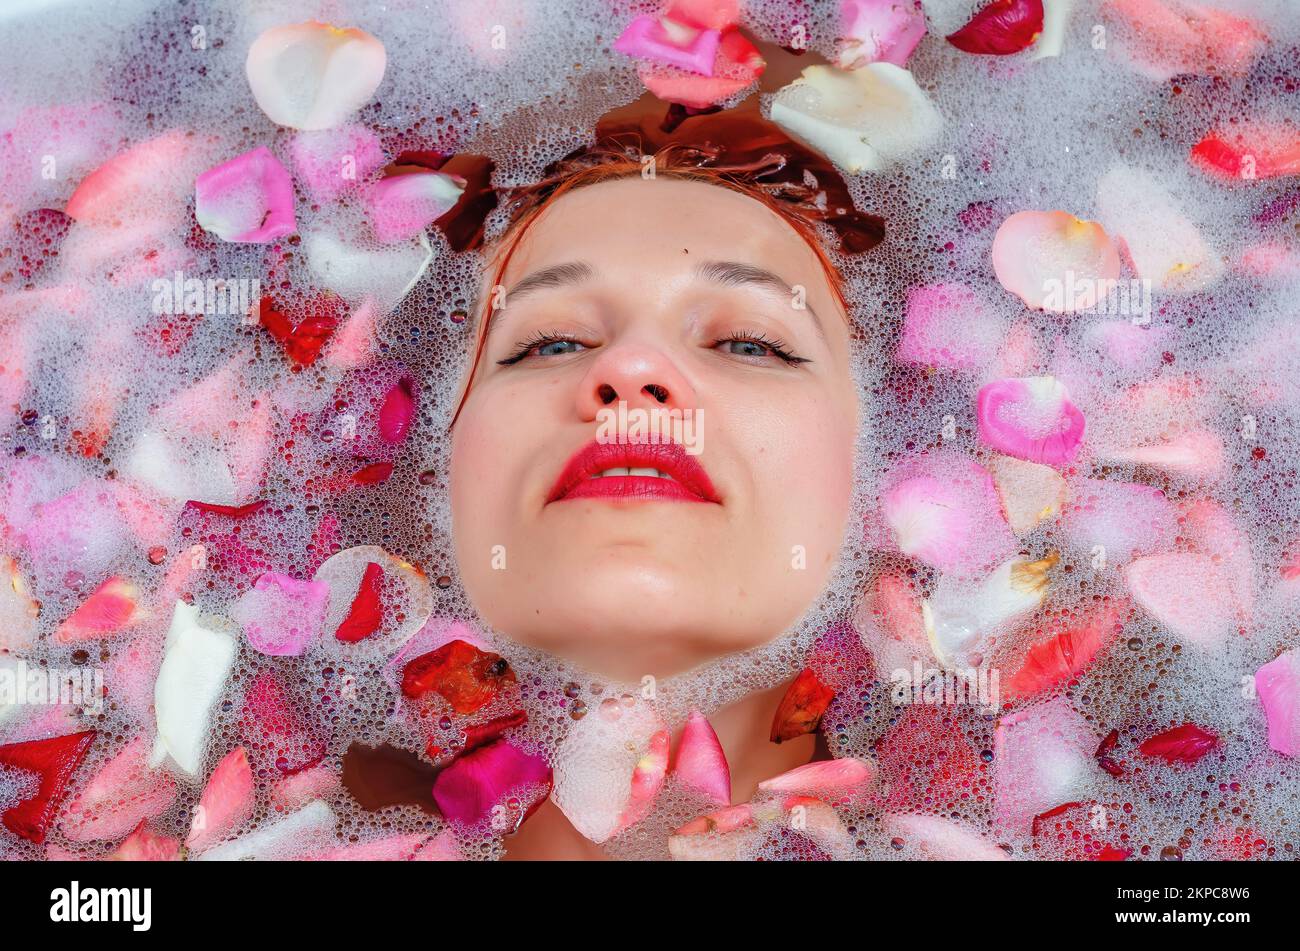 The face of a beautiful woman in the bathroom among foam and rose petals Stock Photo